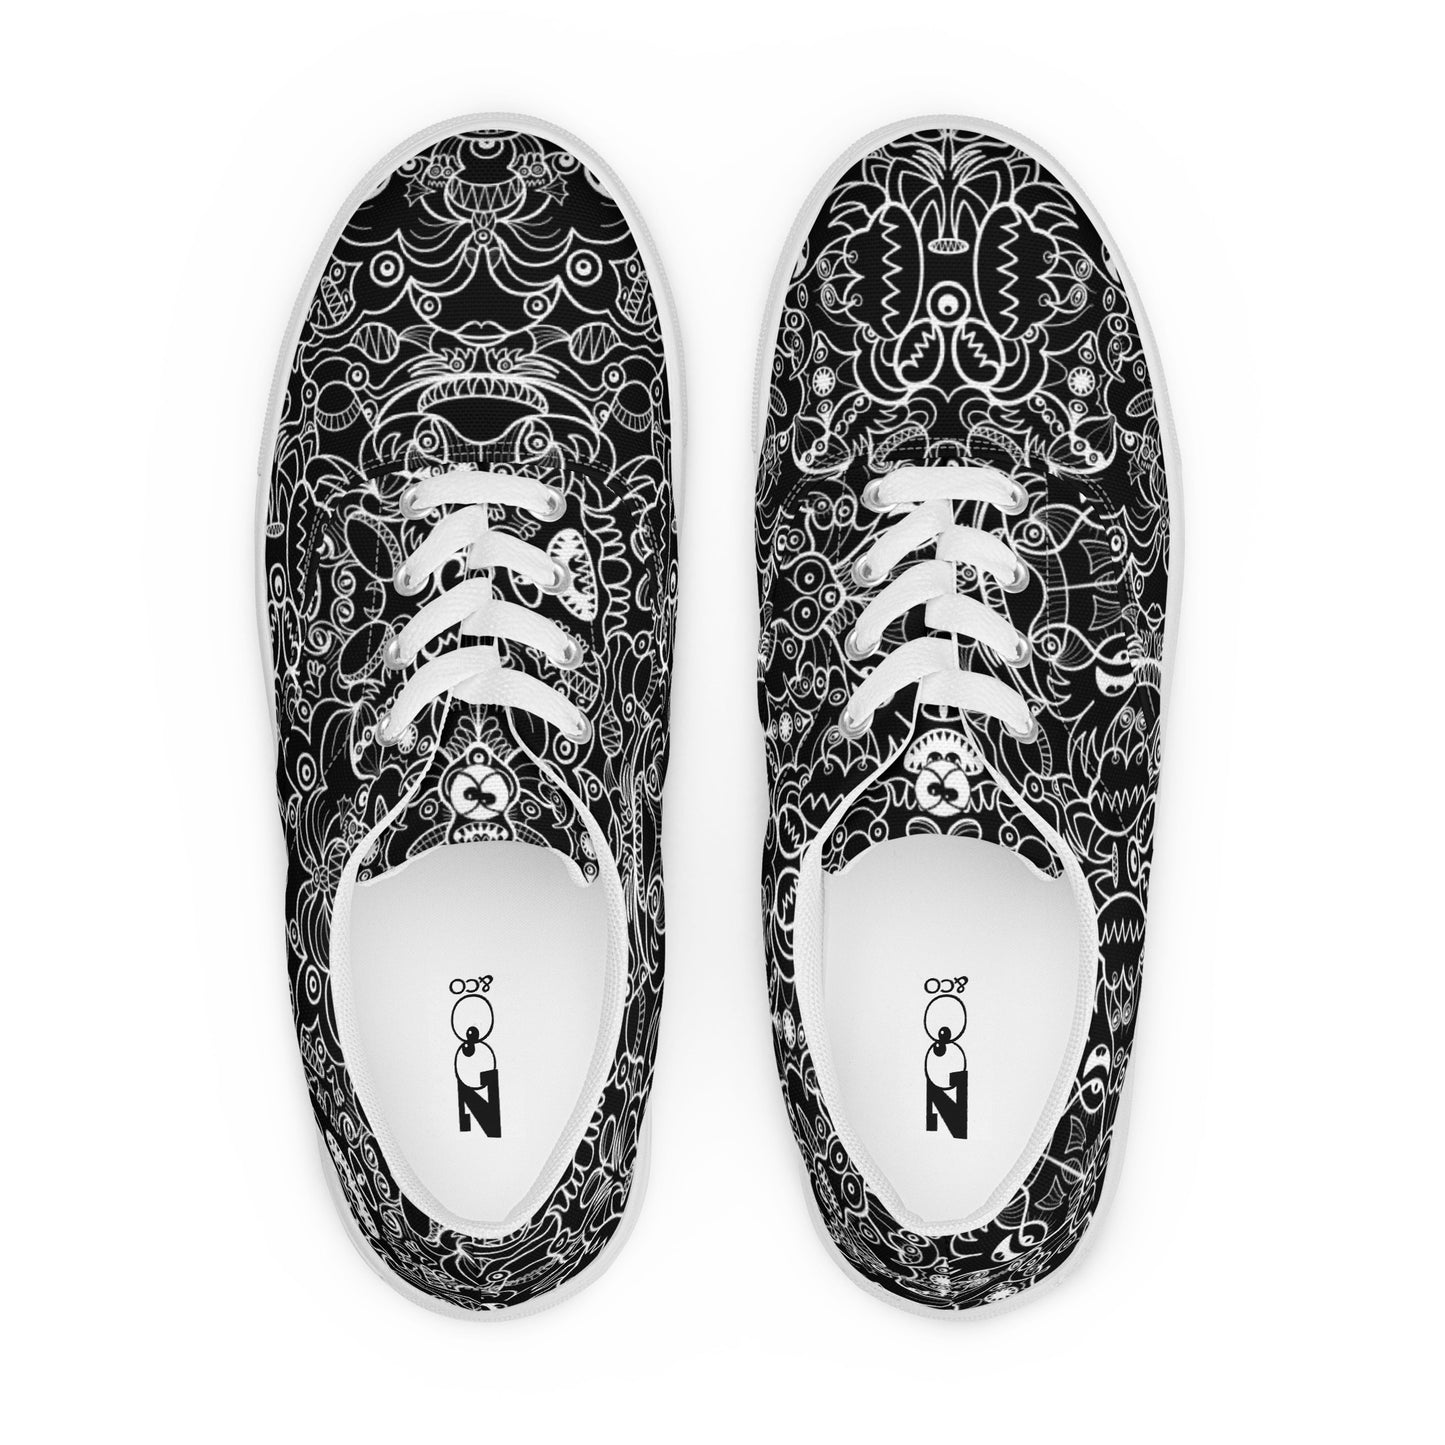 The powerful dark side of the Doodle world Men’s lace-up canvas shoes. Top view